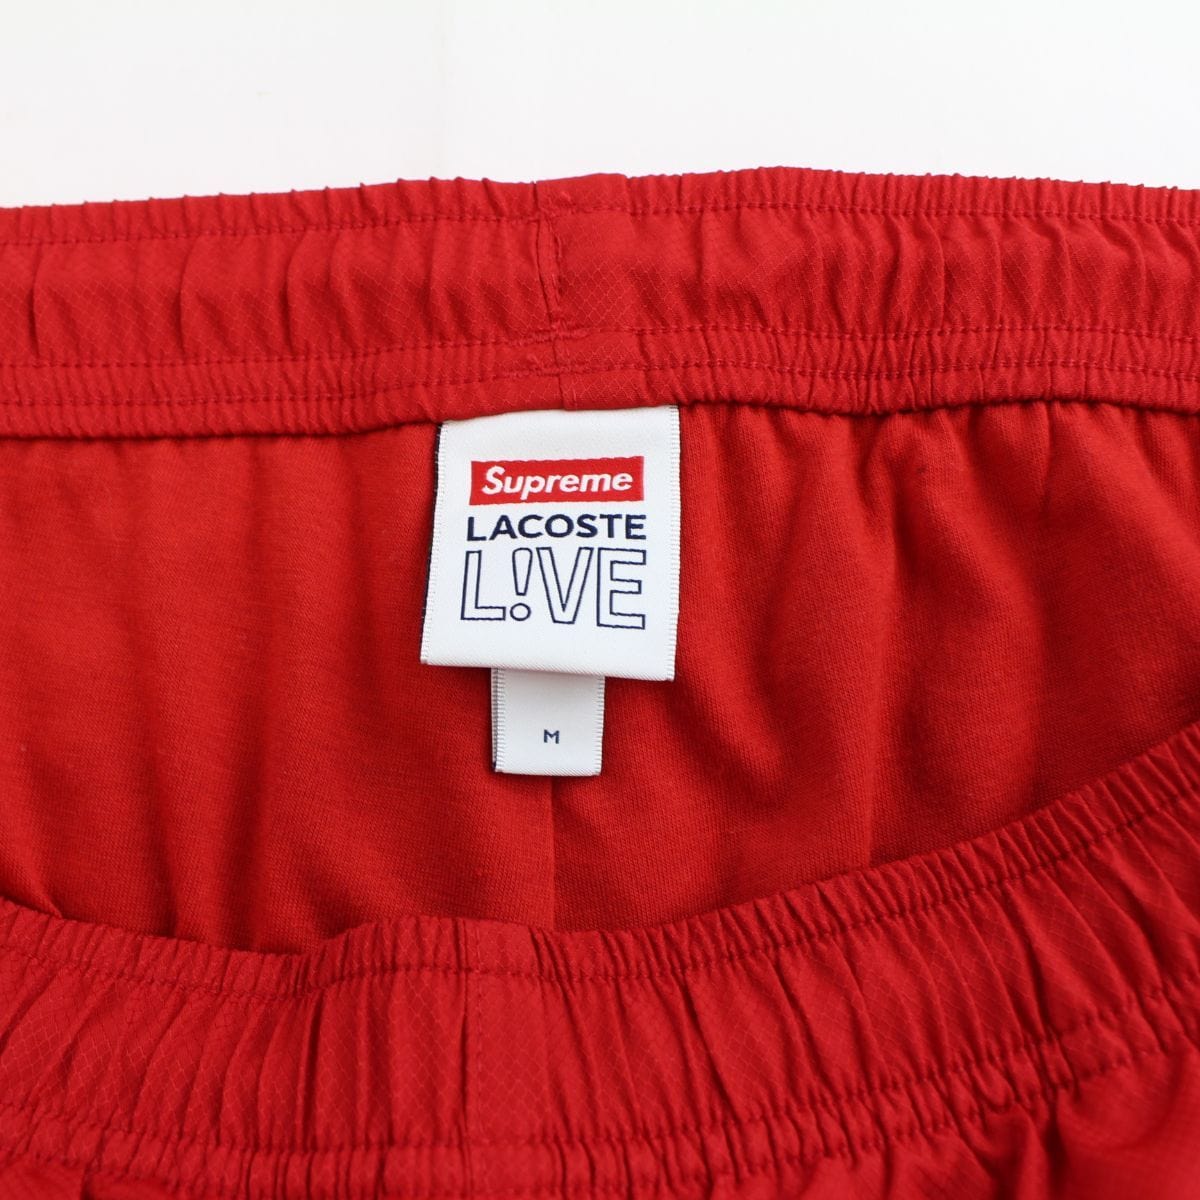 supreme x lacoste track pants red - SaruGeneral